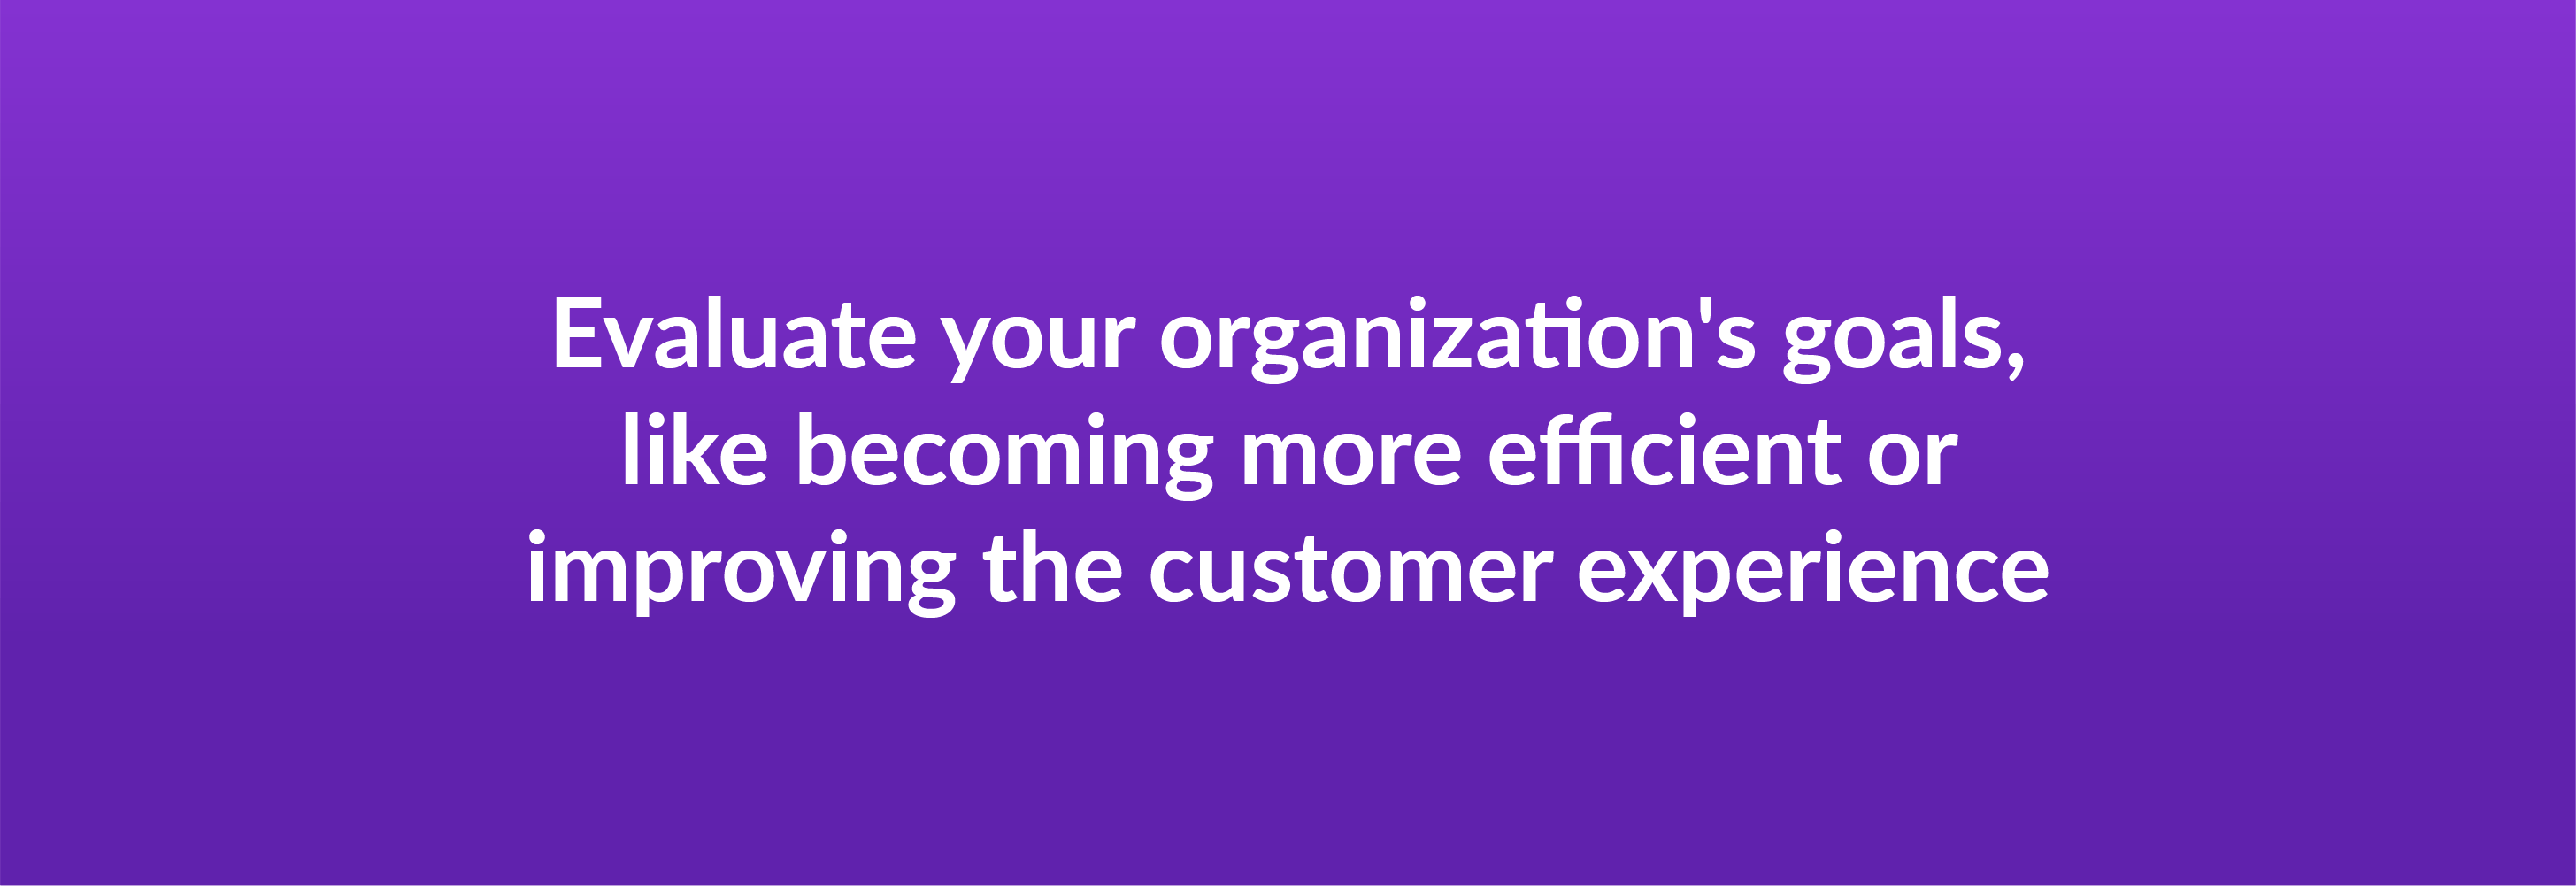 Evaluate your organization's goals, like becoming more efficient or improving the customer experience